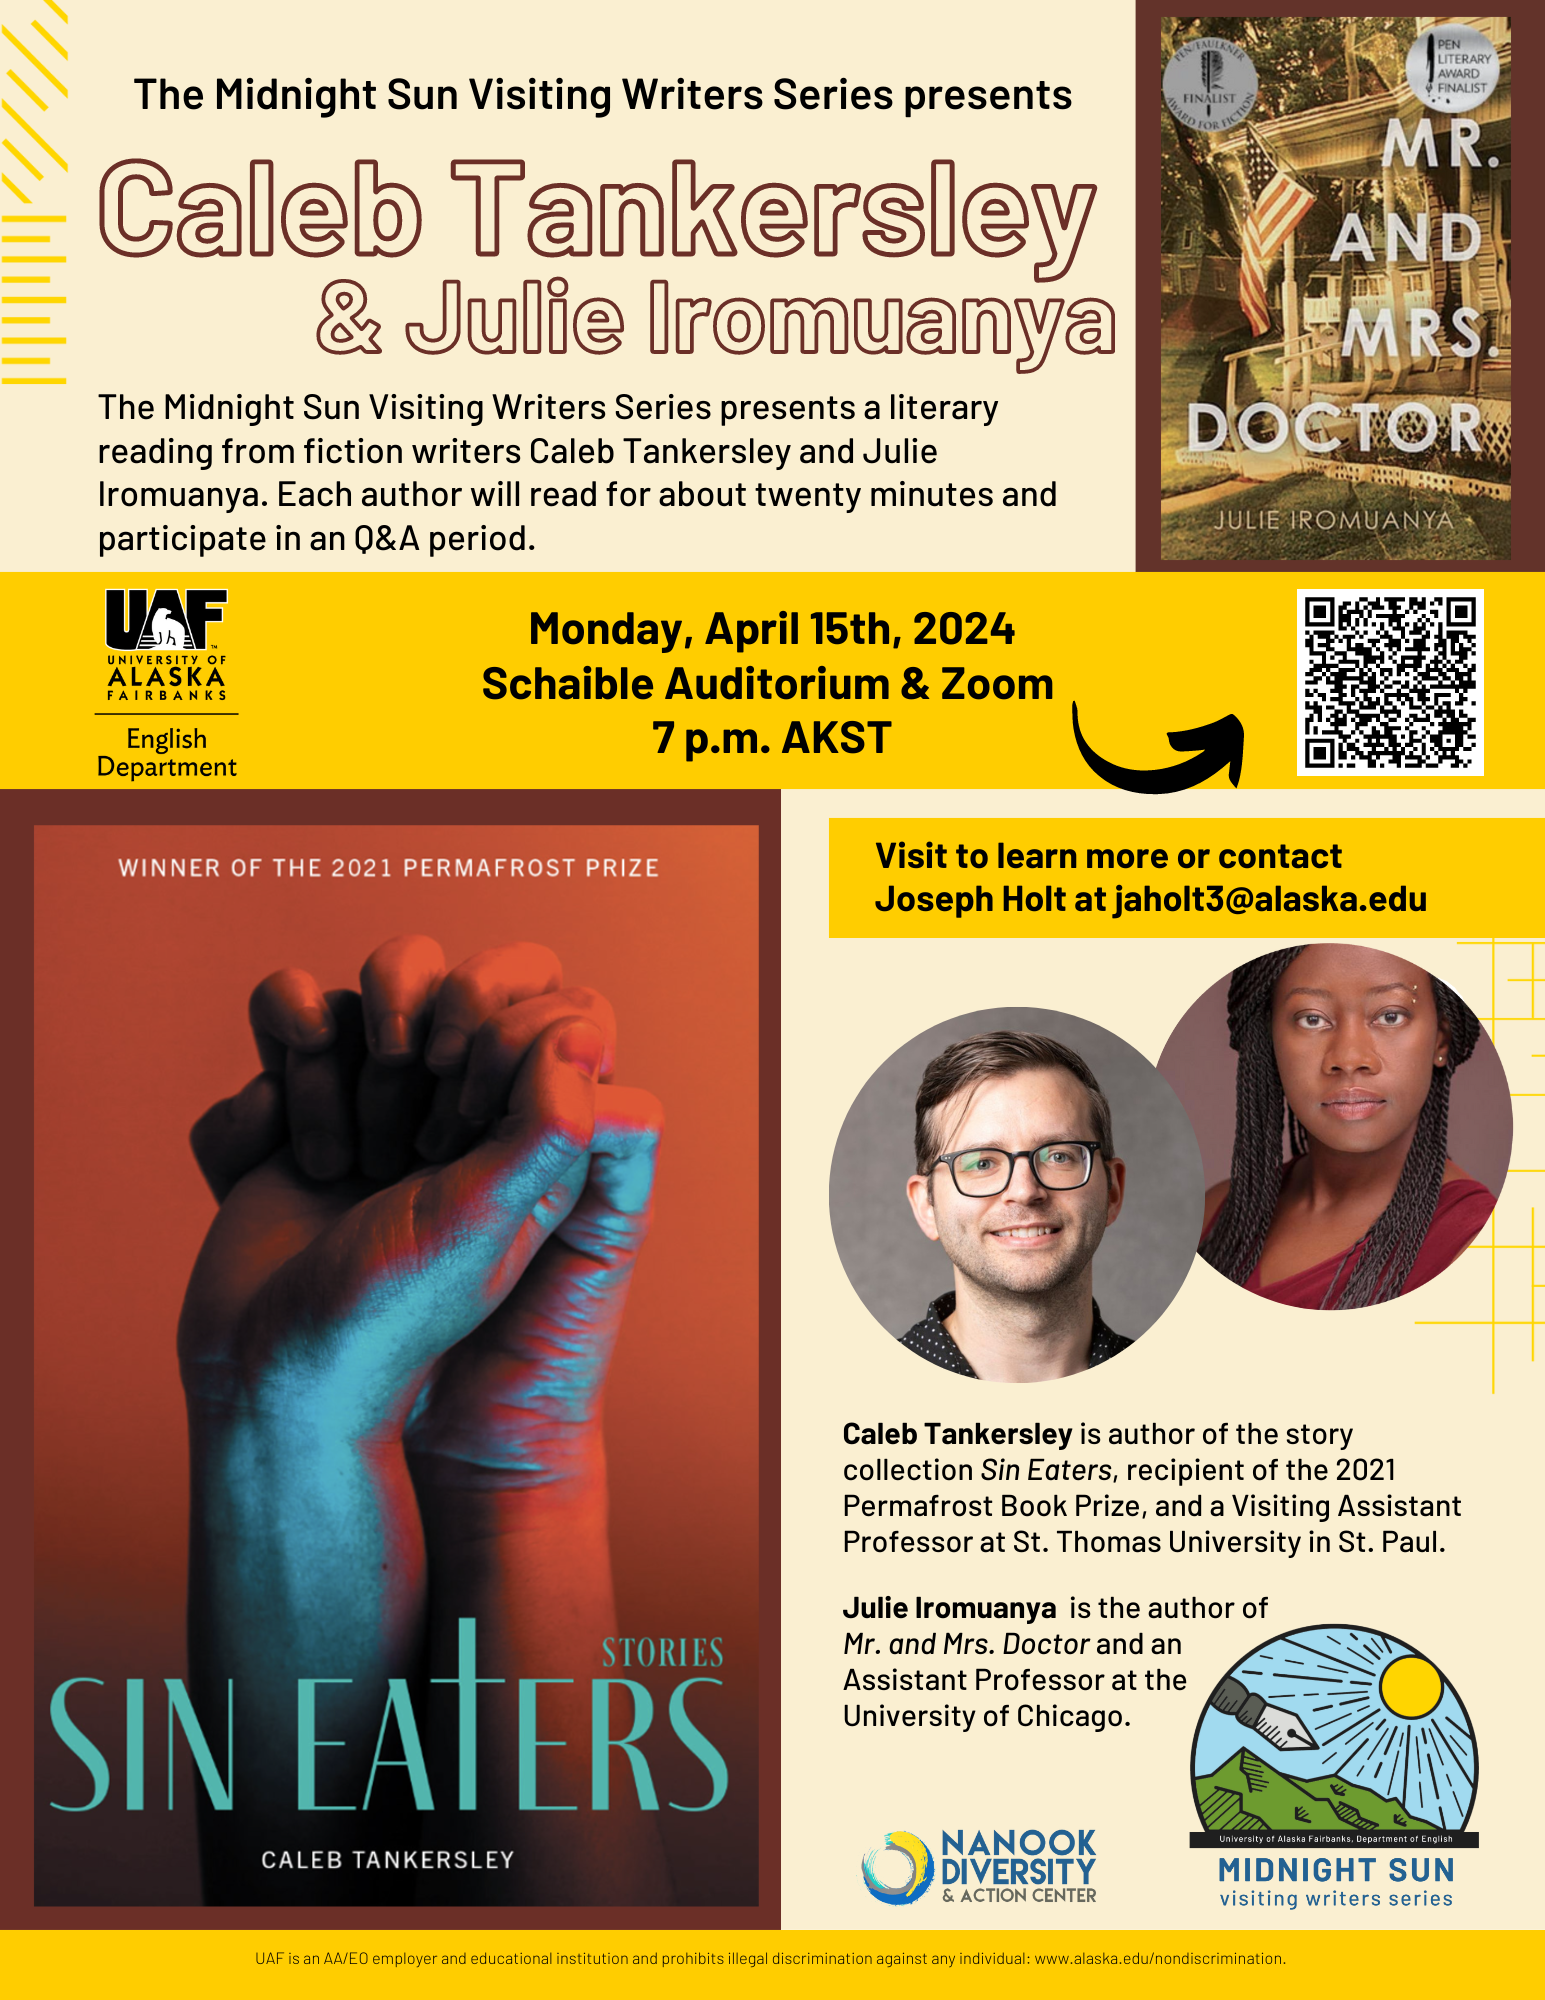 Event poster for the Midnight Sun Visiting Writers Series featuring the book covers and headshots of authors Caleb Tankersley and Julie Iromuanya. UAF image.